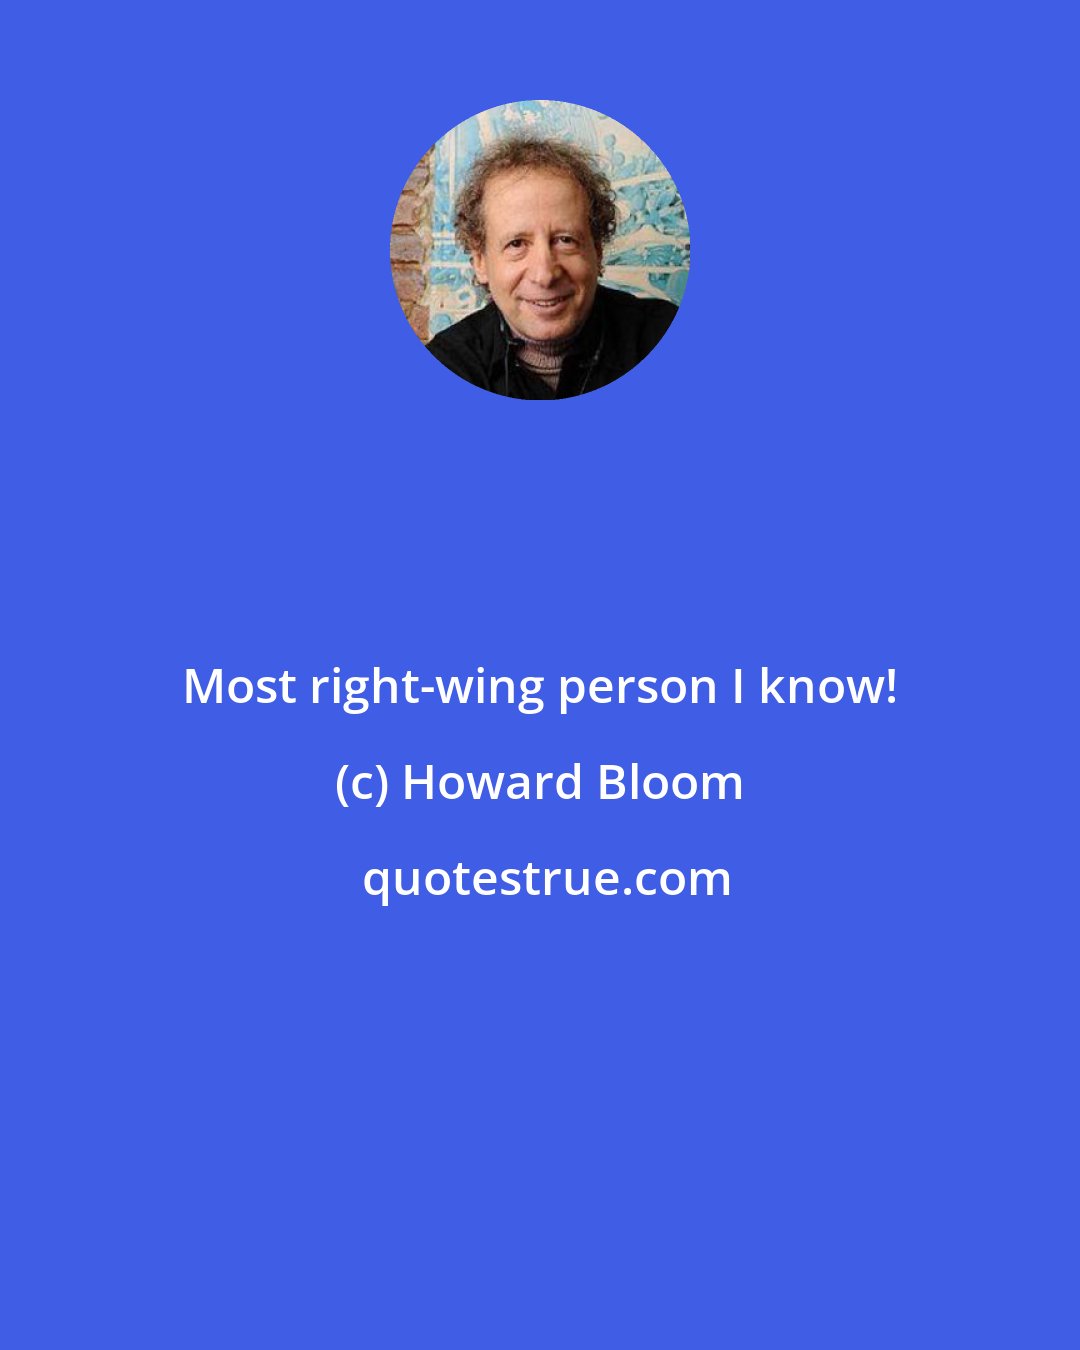 Howard Bloom: Most right-wing person I know!